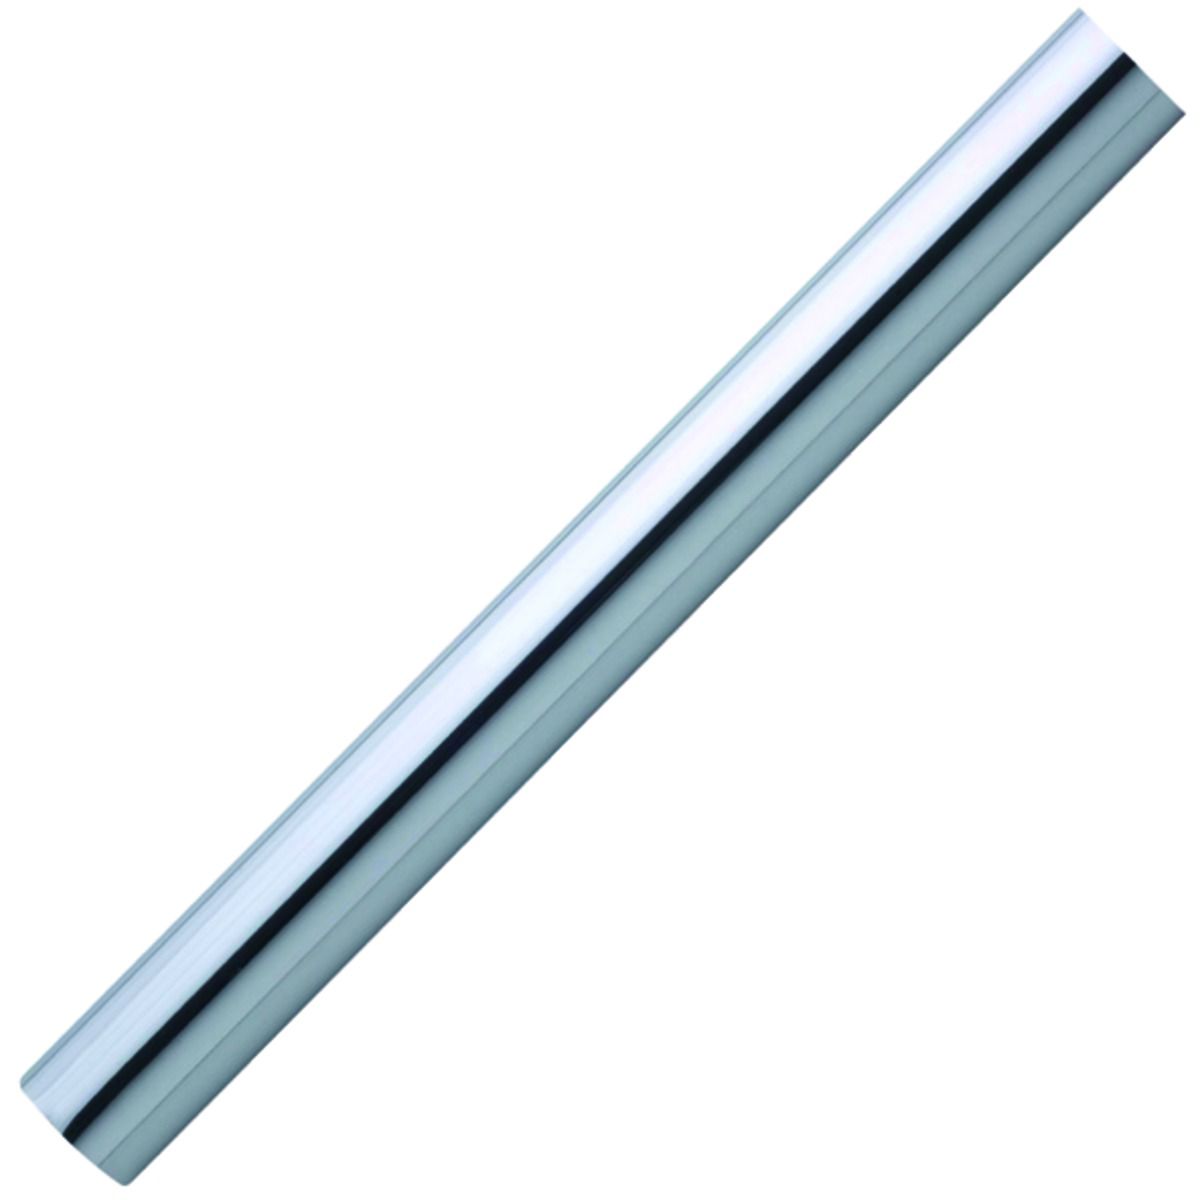 Image of Wickes Polished Chrome Handrail - 40mm x 3.6m